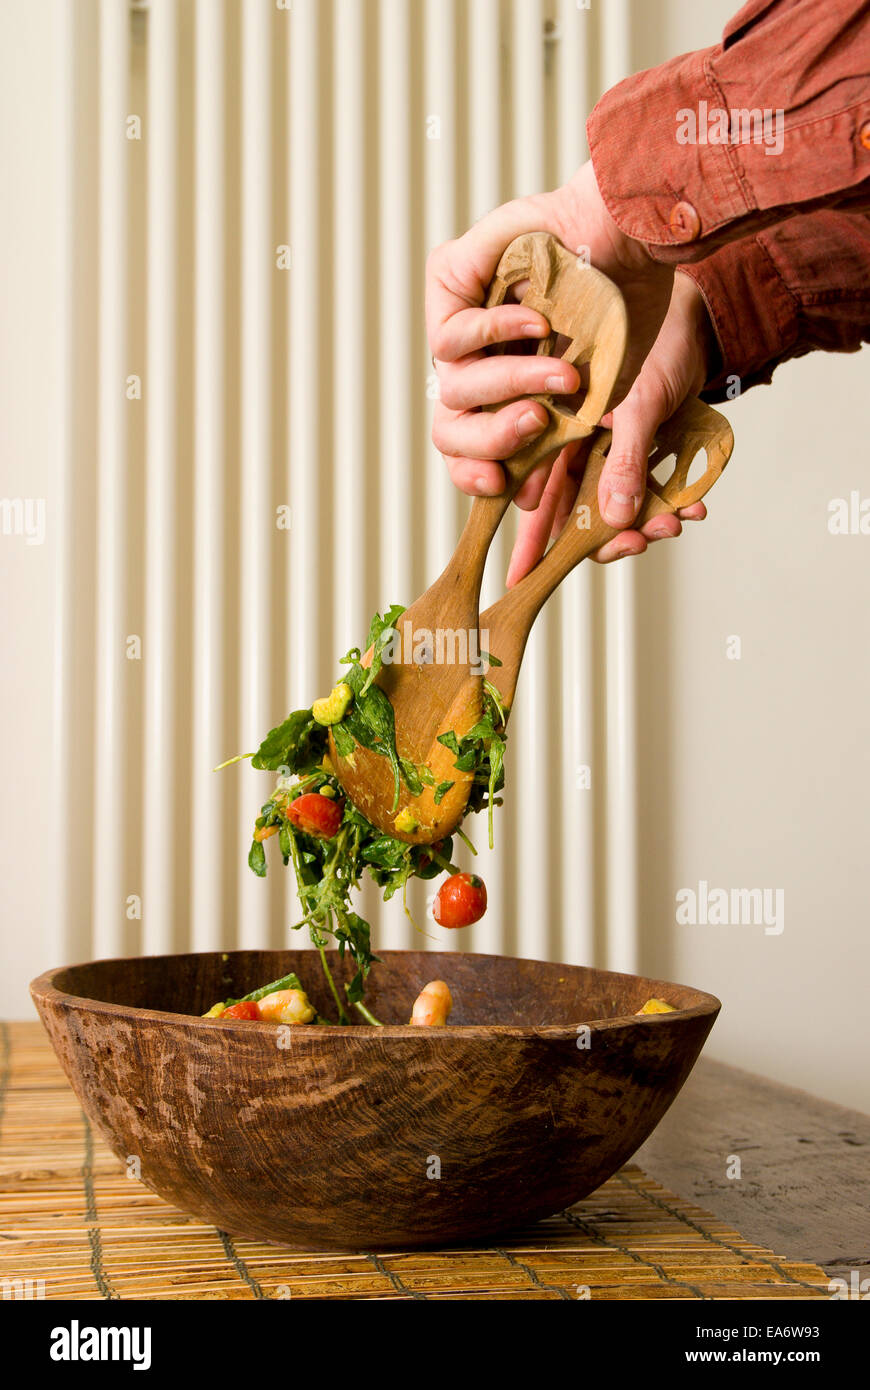 man tossing a green leaves and tomato salad Stock Photo